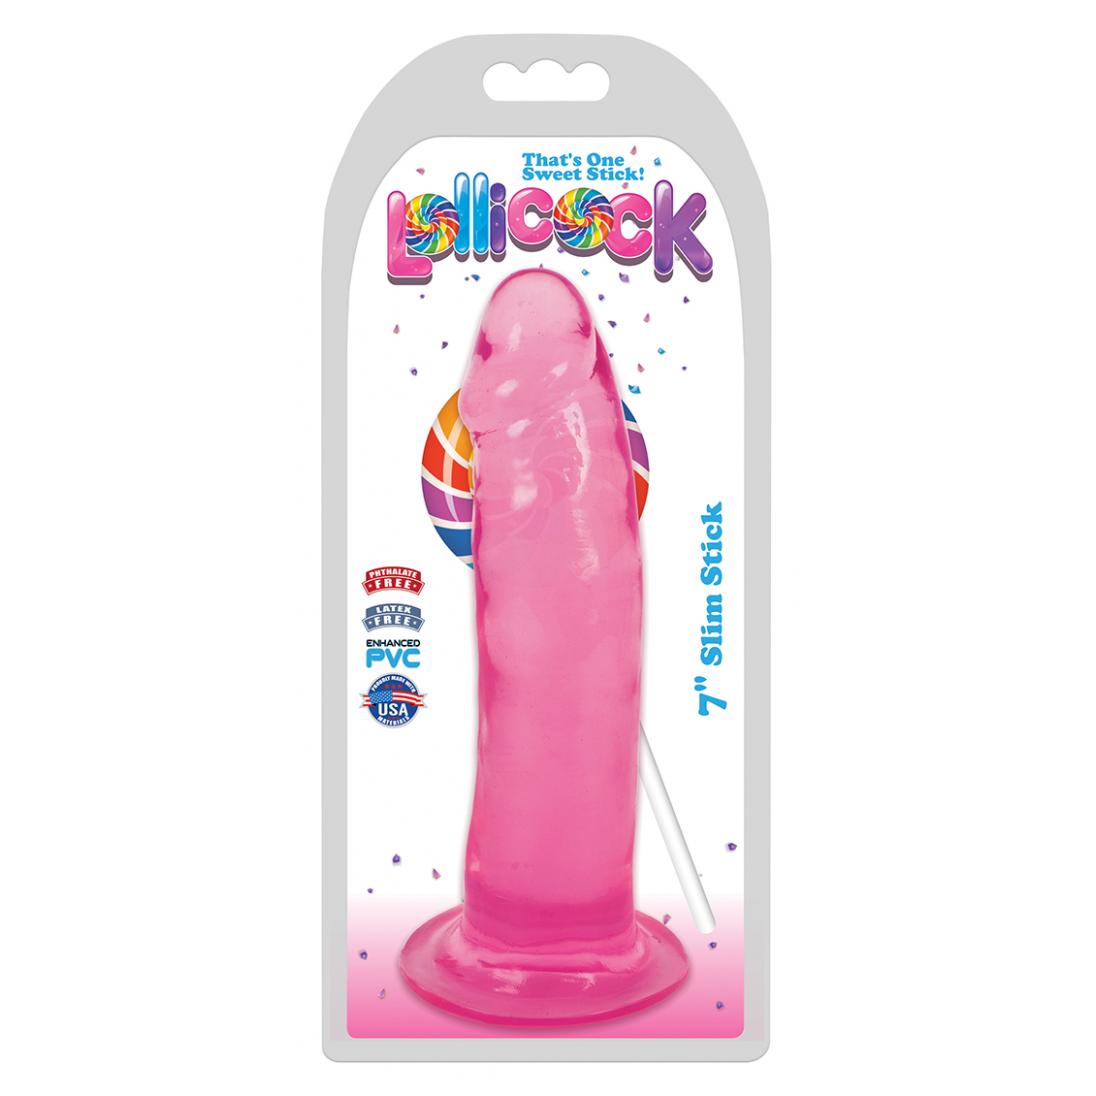 Curve Toys Lollicocks 7 Inch Slim Stick Dong Cherry Ice Pink CN 14 0504 33 643380985651 Boxview